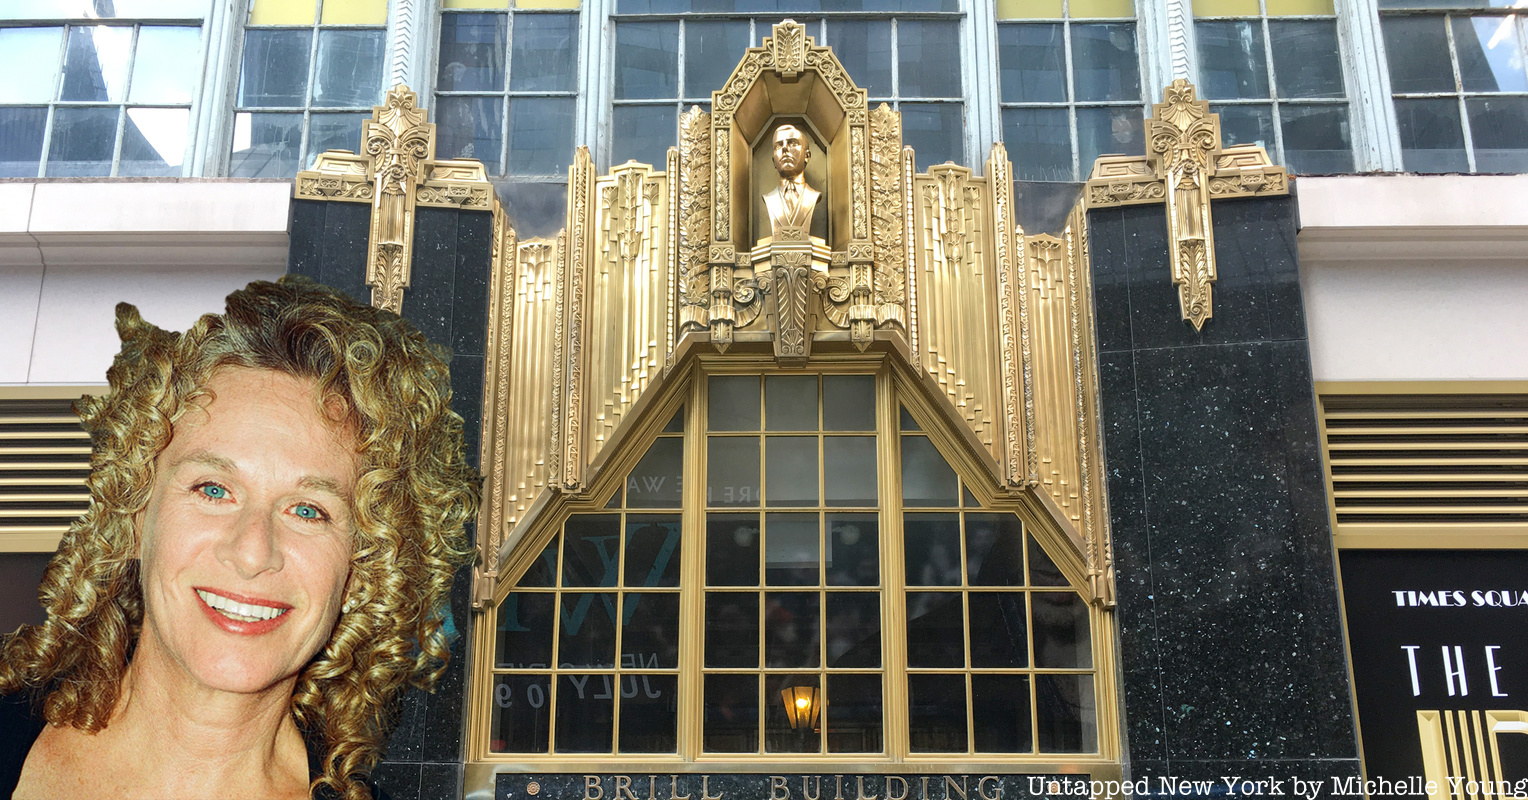 Carole King and the Brill Building